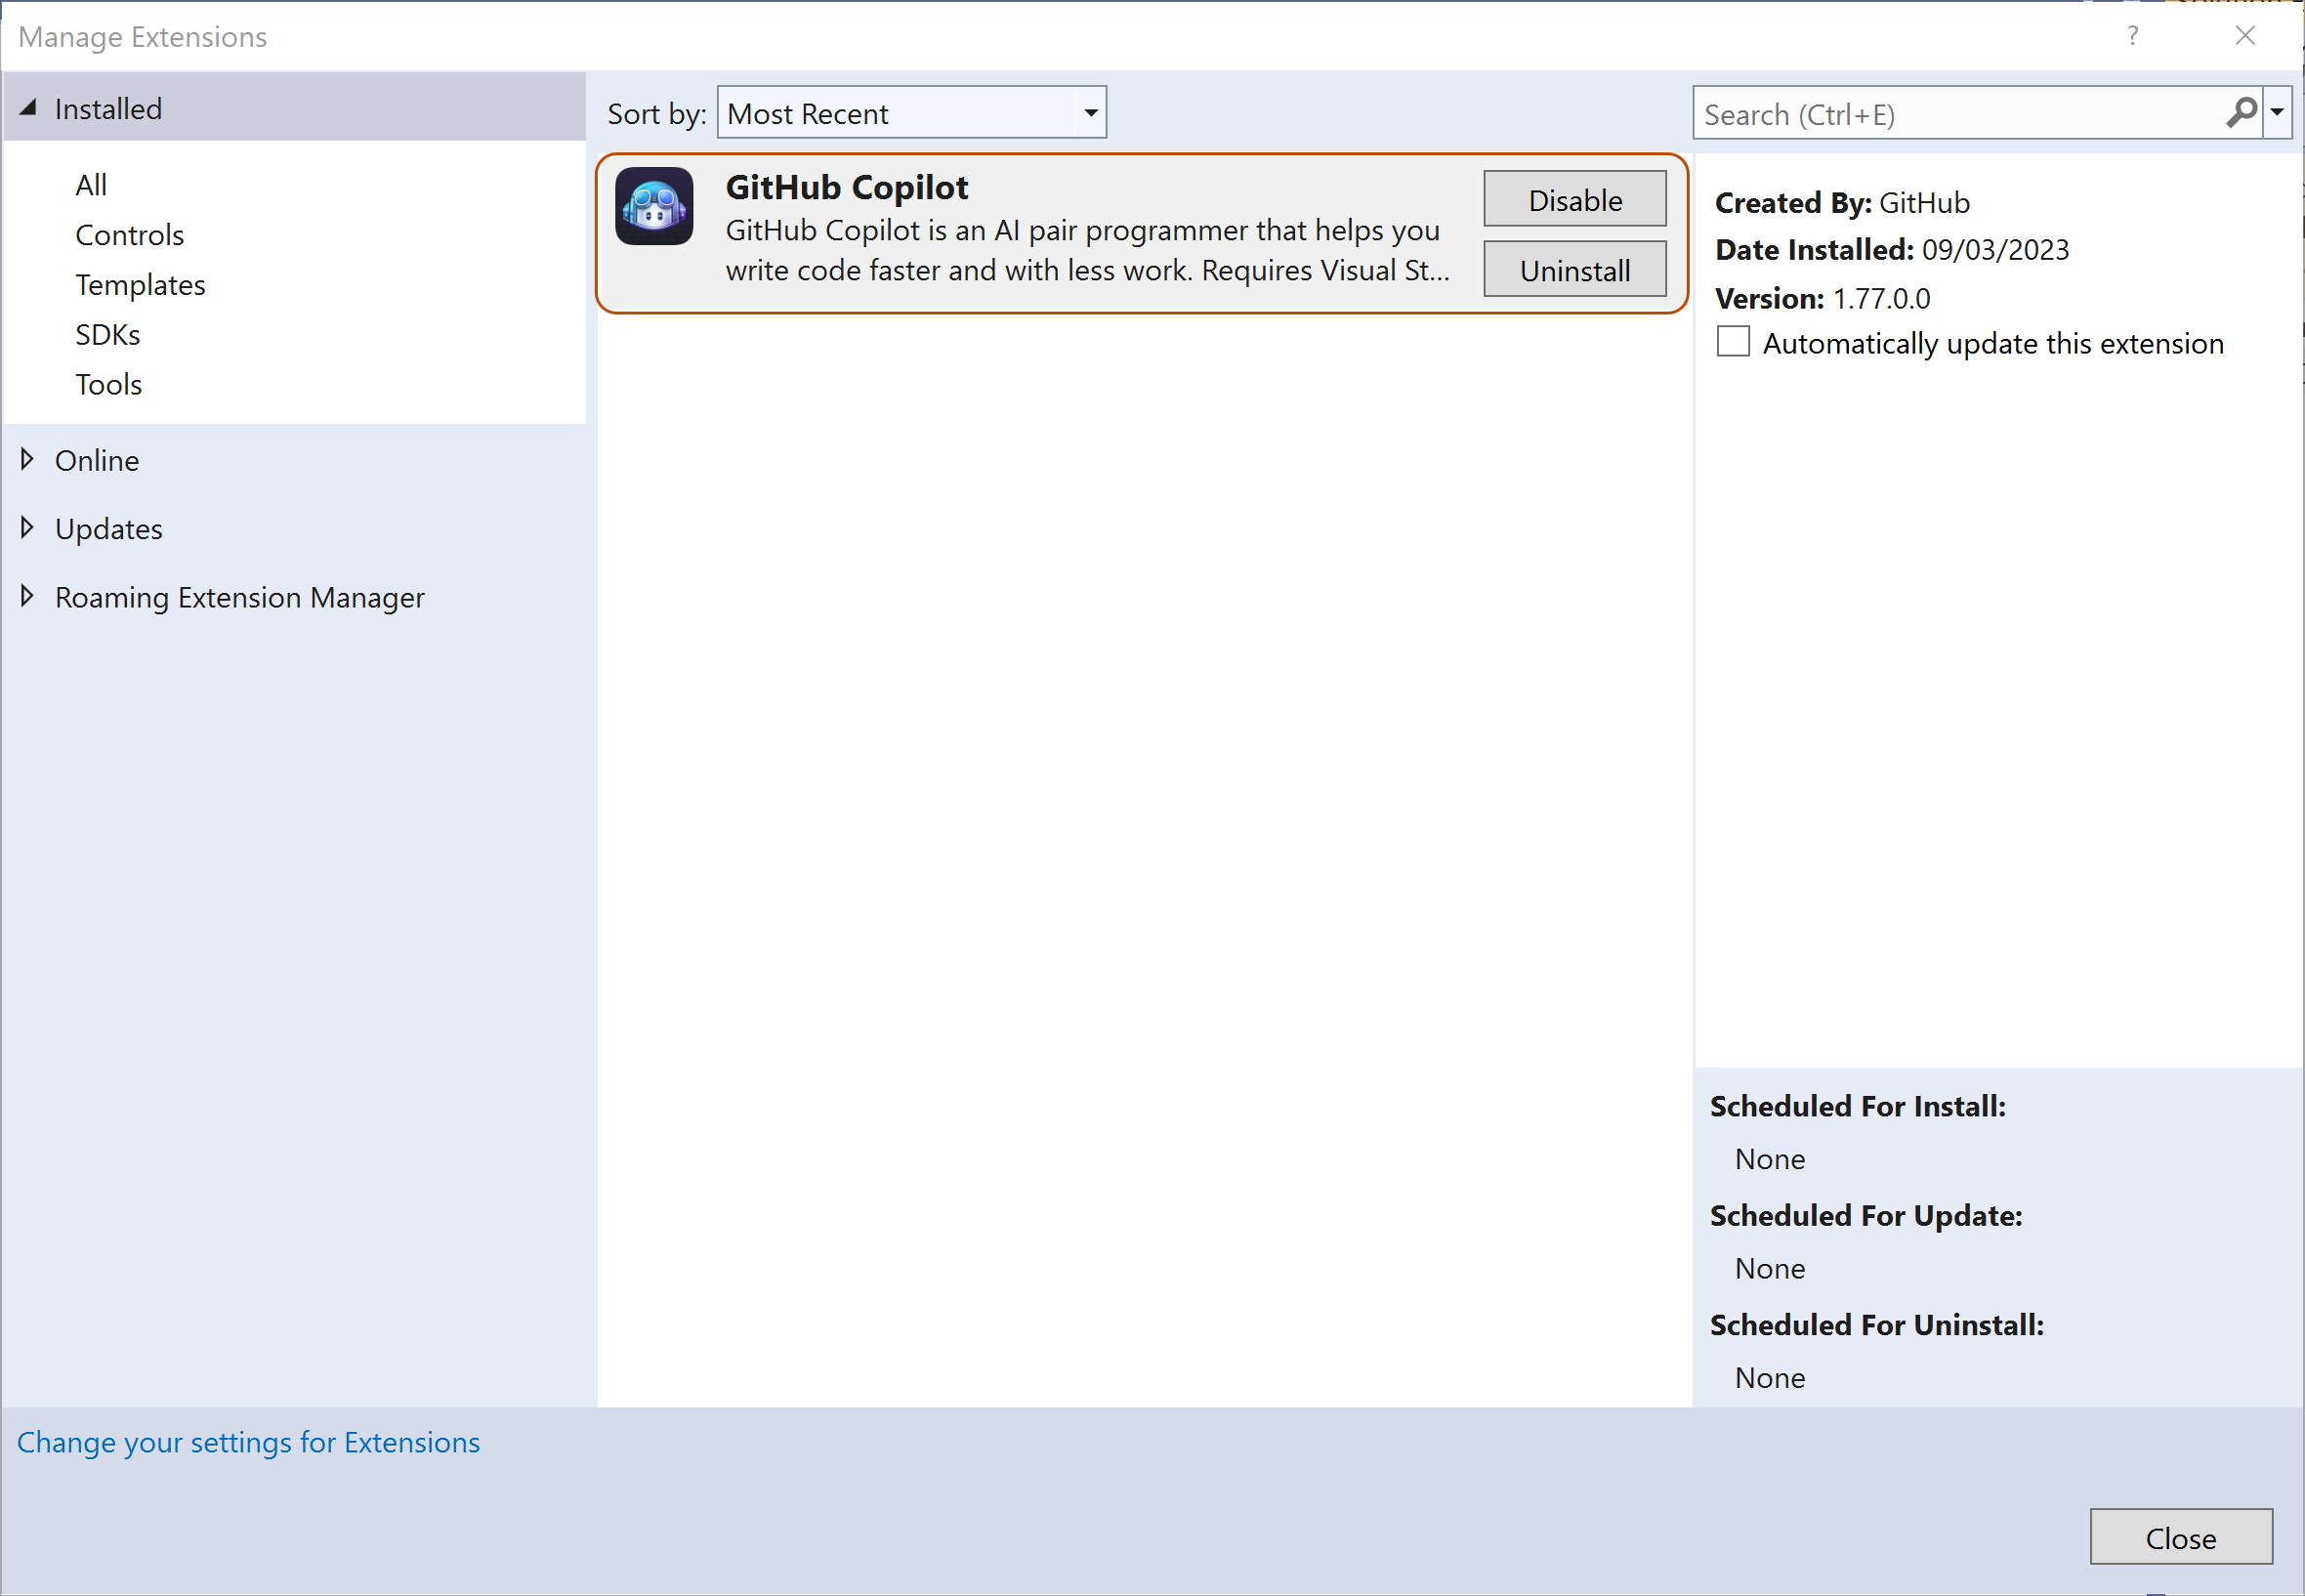 Screenshot of a list of installed extensions in Visual Studio. The "GitHub Copilot" extension is highlighted with an orange outline.